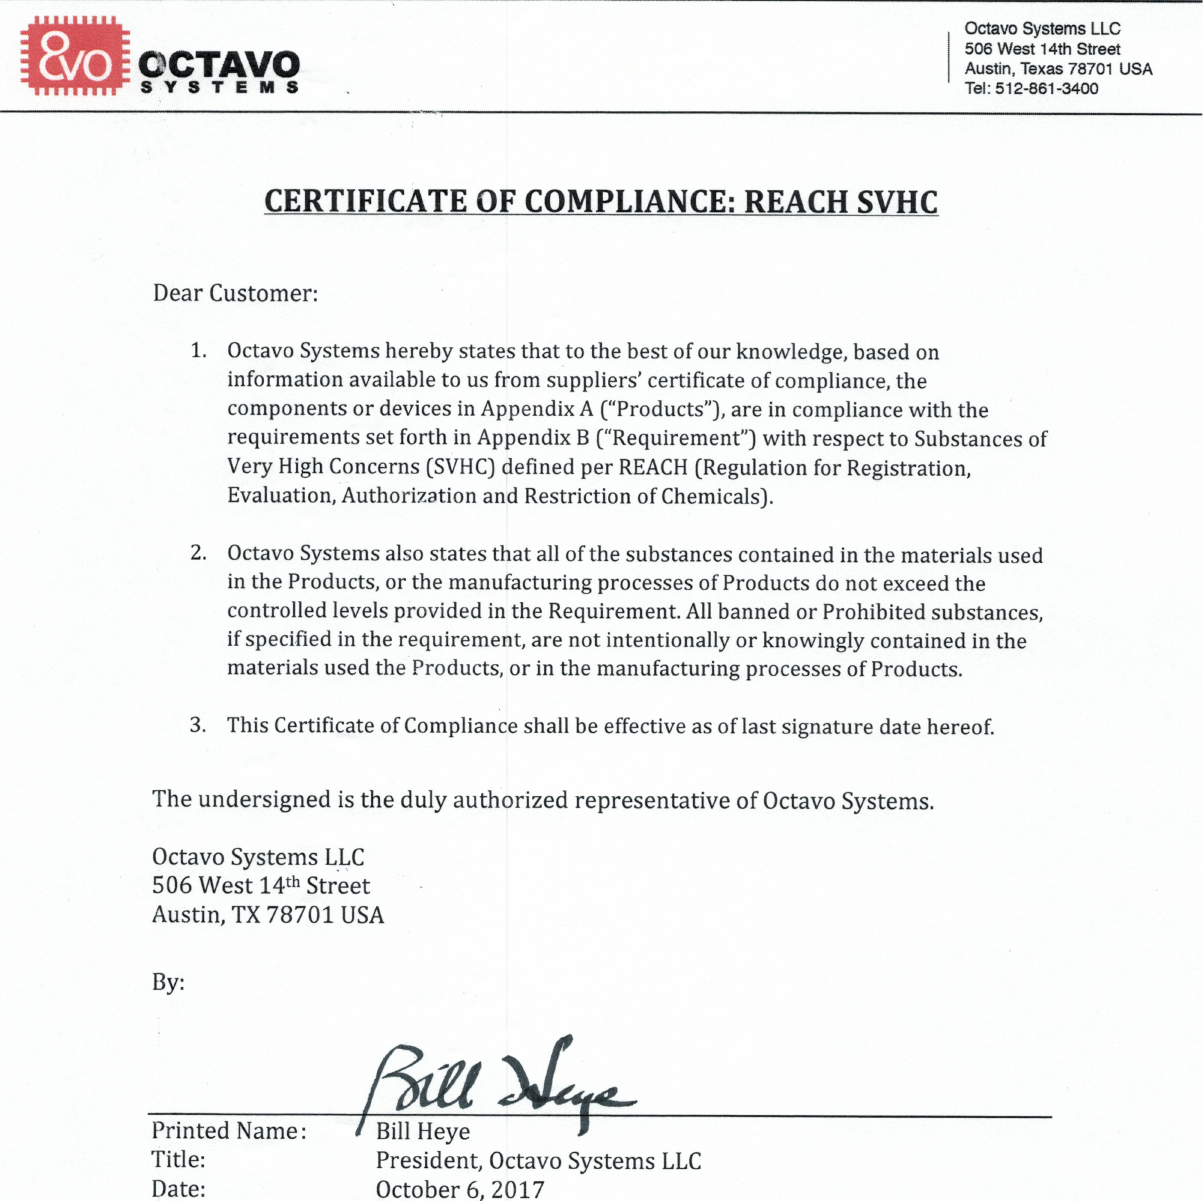 REACH SVHC Compliance Certificate 102017 Signed Octavo Systems